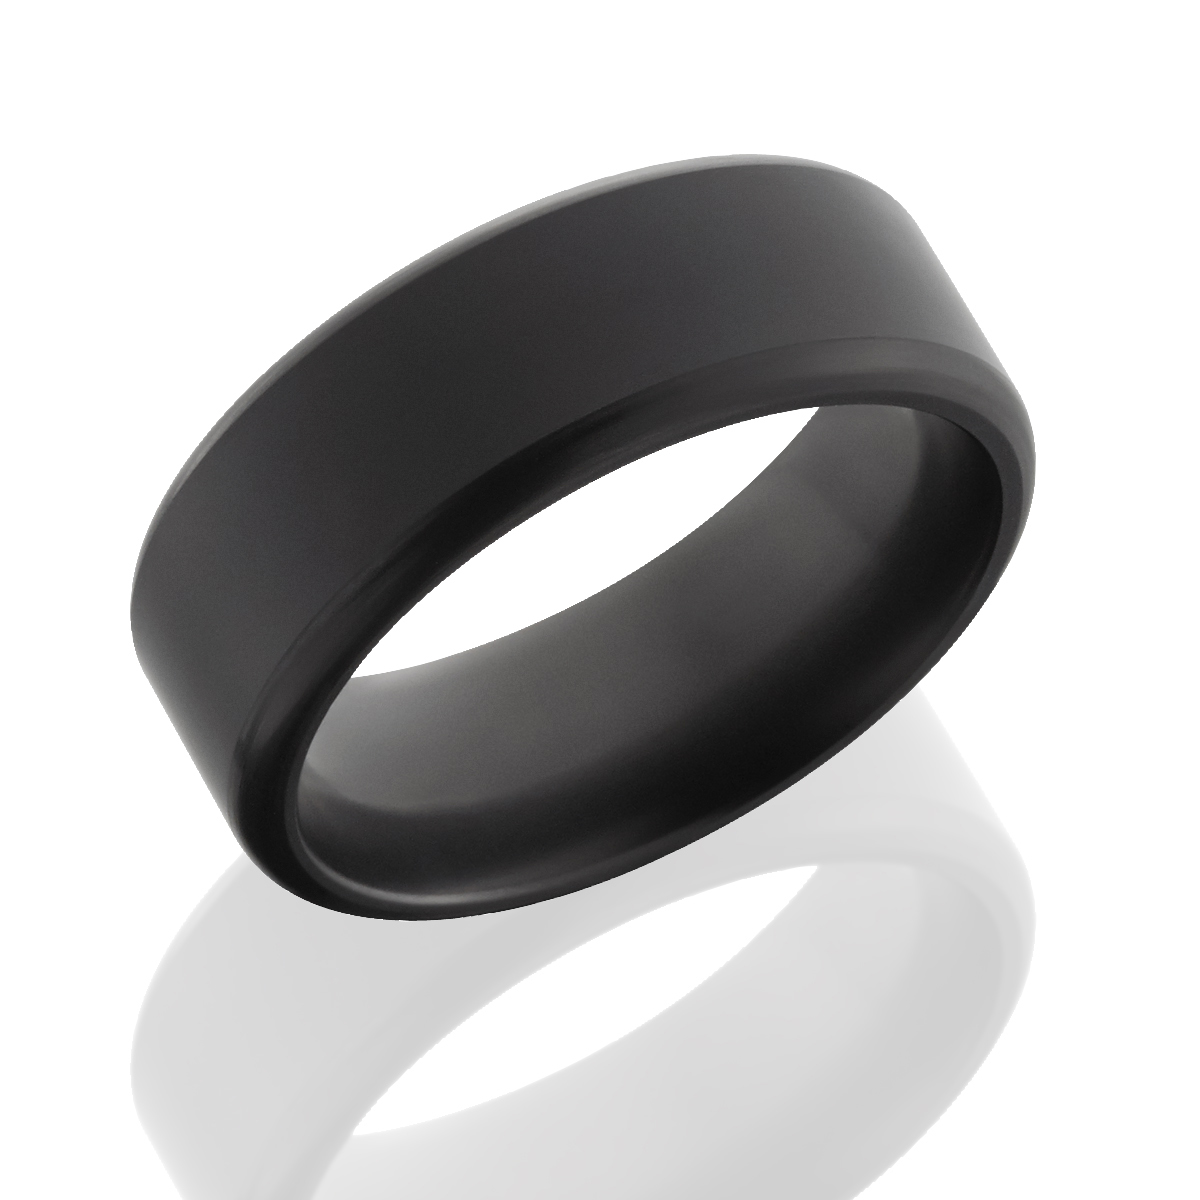 10mm Brushed Matte Black Tungsten Ring with Polished Edges